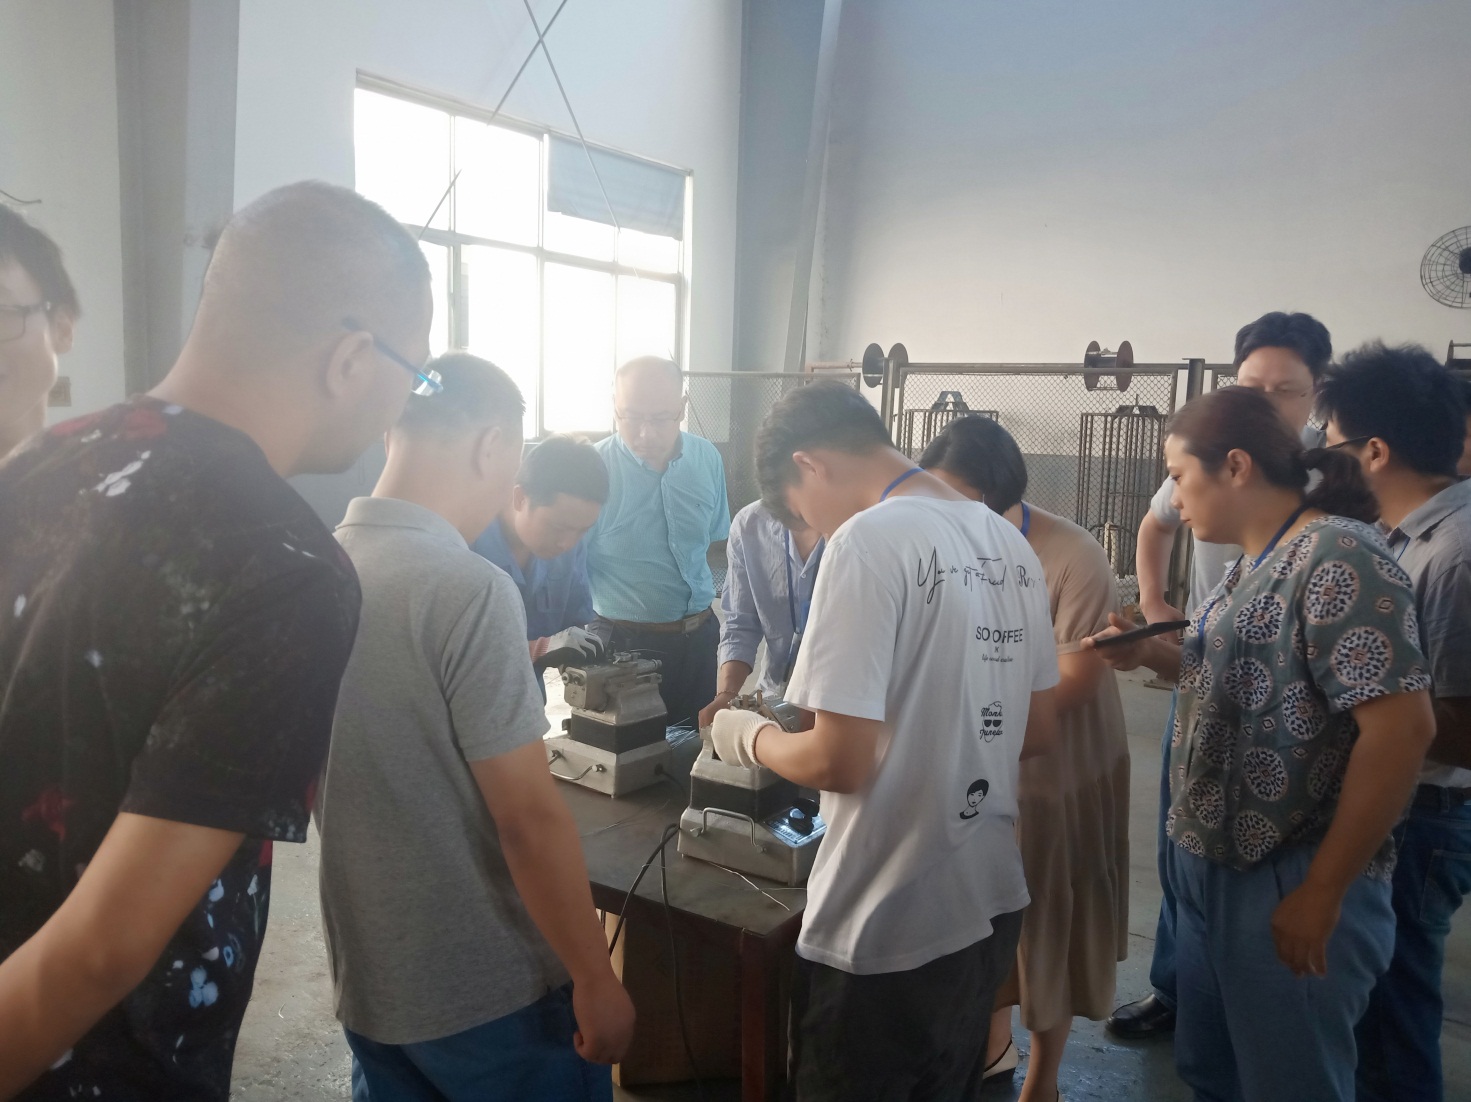 The company successfully held a welding wire skill competition